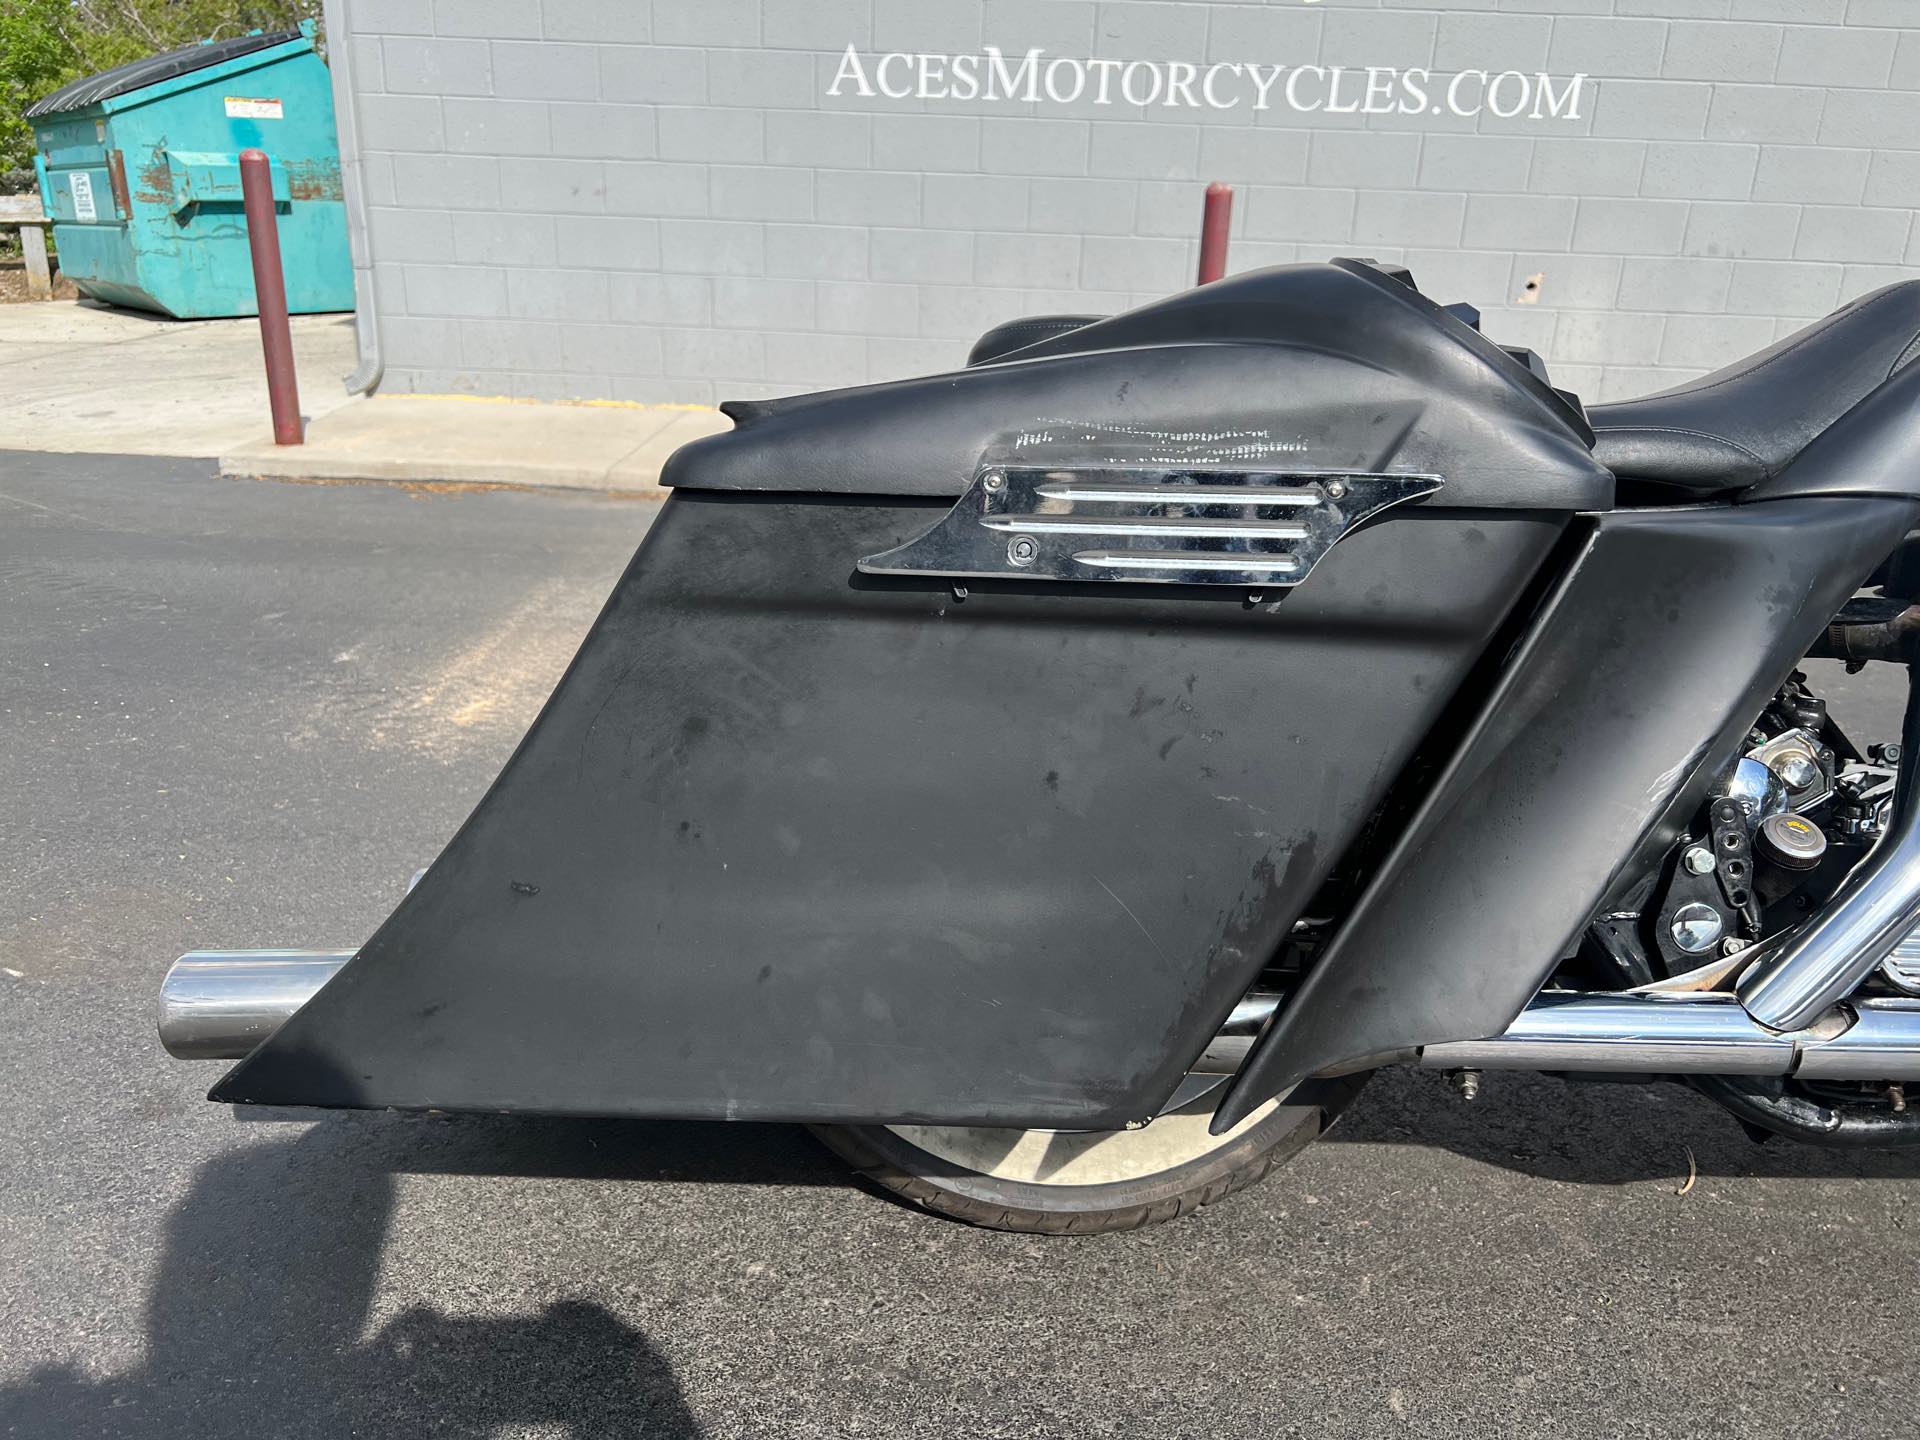 1997 Harley-Davidson FLHR at Aces Motorcycles - Fort Collins